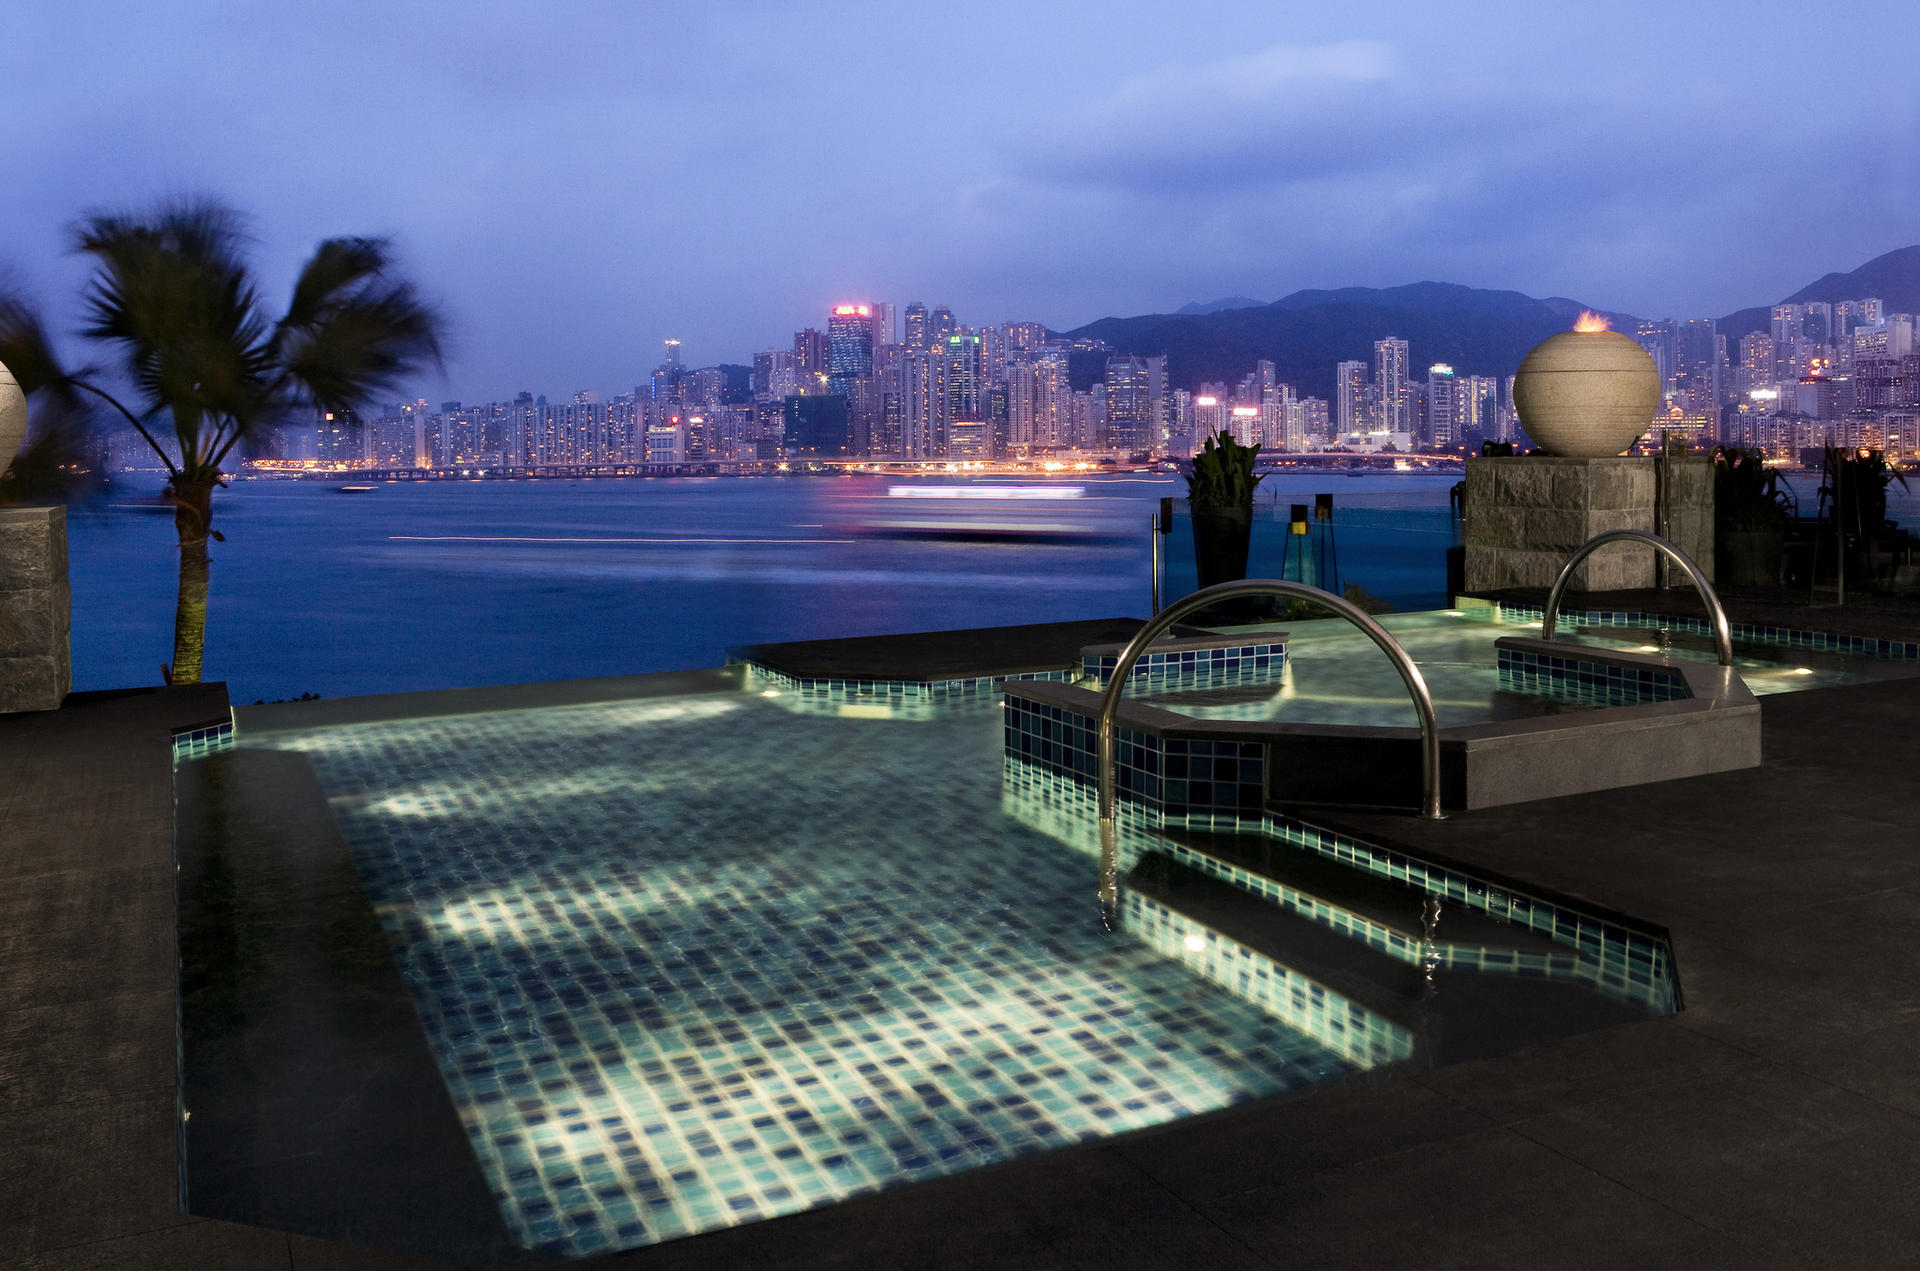 Take the plunge: the three-temperature spa pools on the terrace.